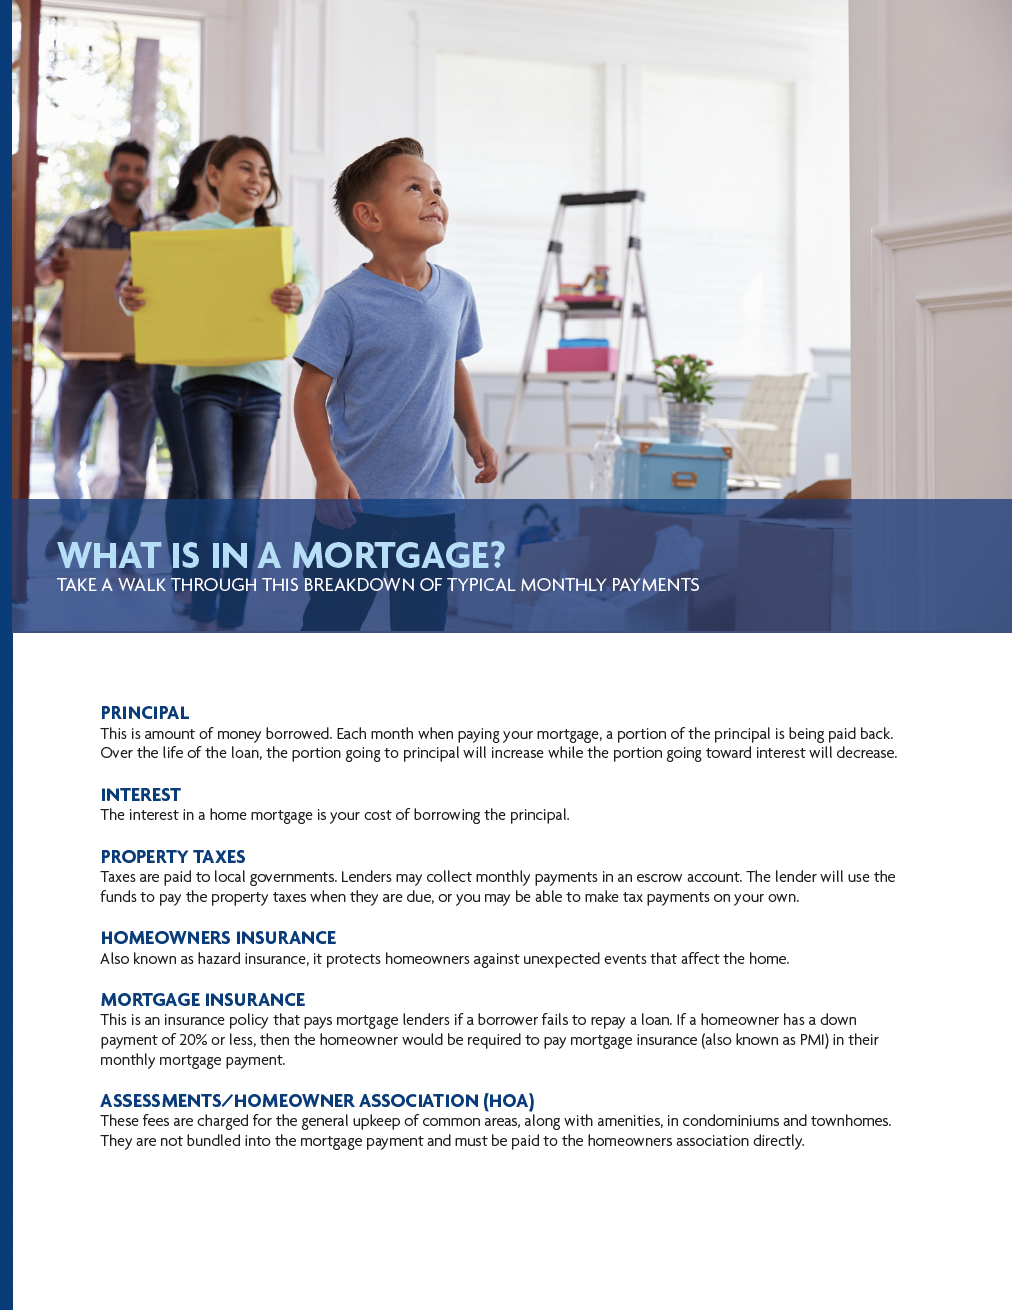 Wm what's in a mortgage.png